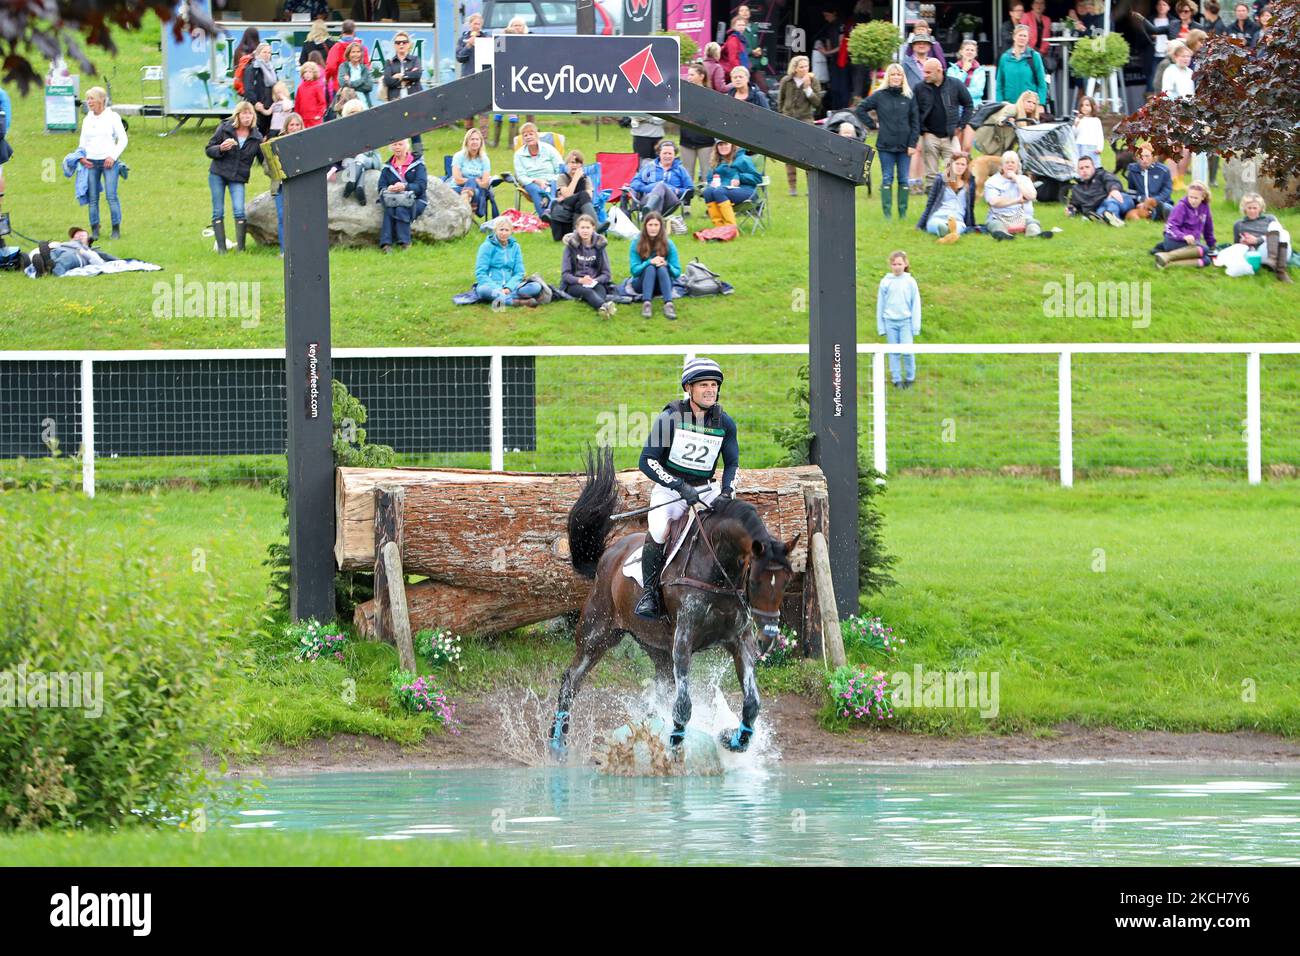 Alexander Bragg riding Quindiva during 4* Cross Country event at the Barbury Castle International Horse Trials, Marlborough, Wiltshire, UK on Sunday 11th July 2021. (Photo by Jon Bromley/MI News/NurPhoto) Stock Photo